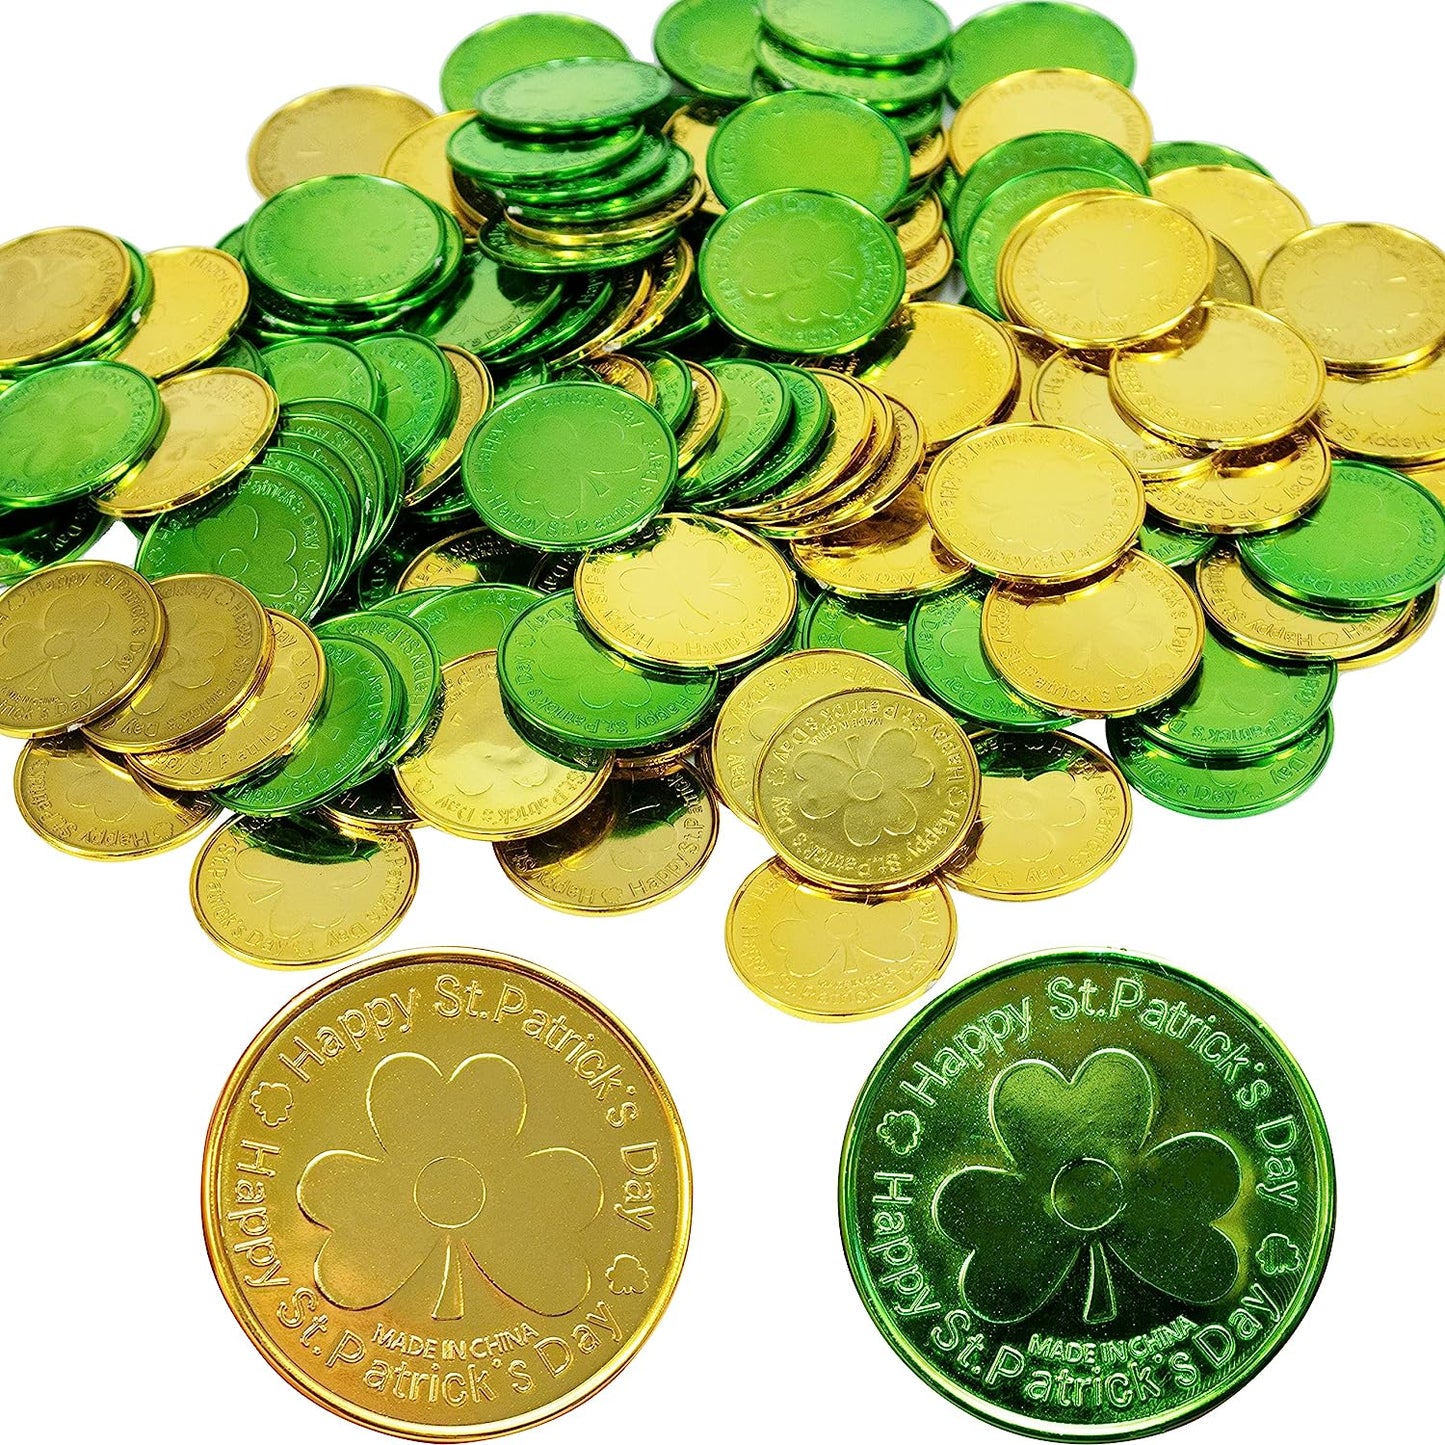 GIFTEXPRESS 144pcs St. Patrick’s Lucky Coins Green and Gold Shamrock Coins